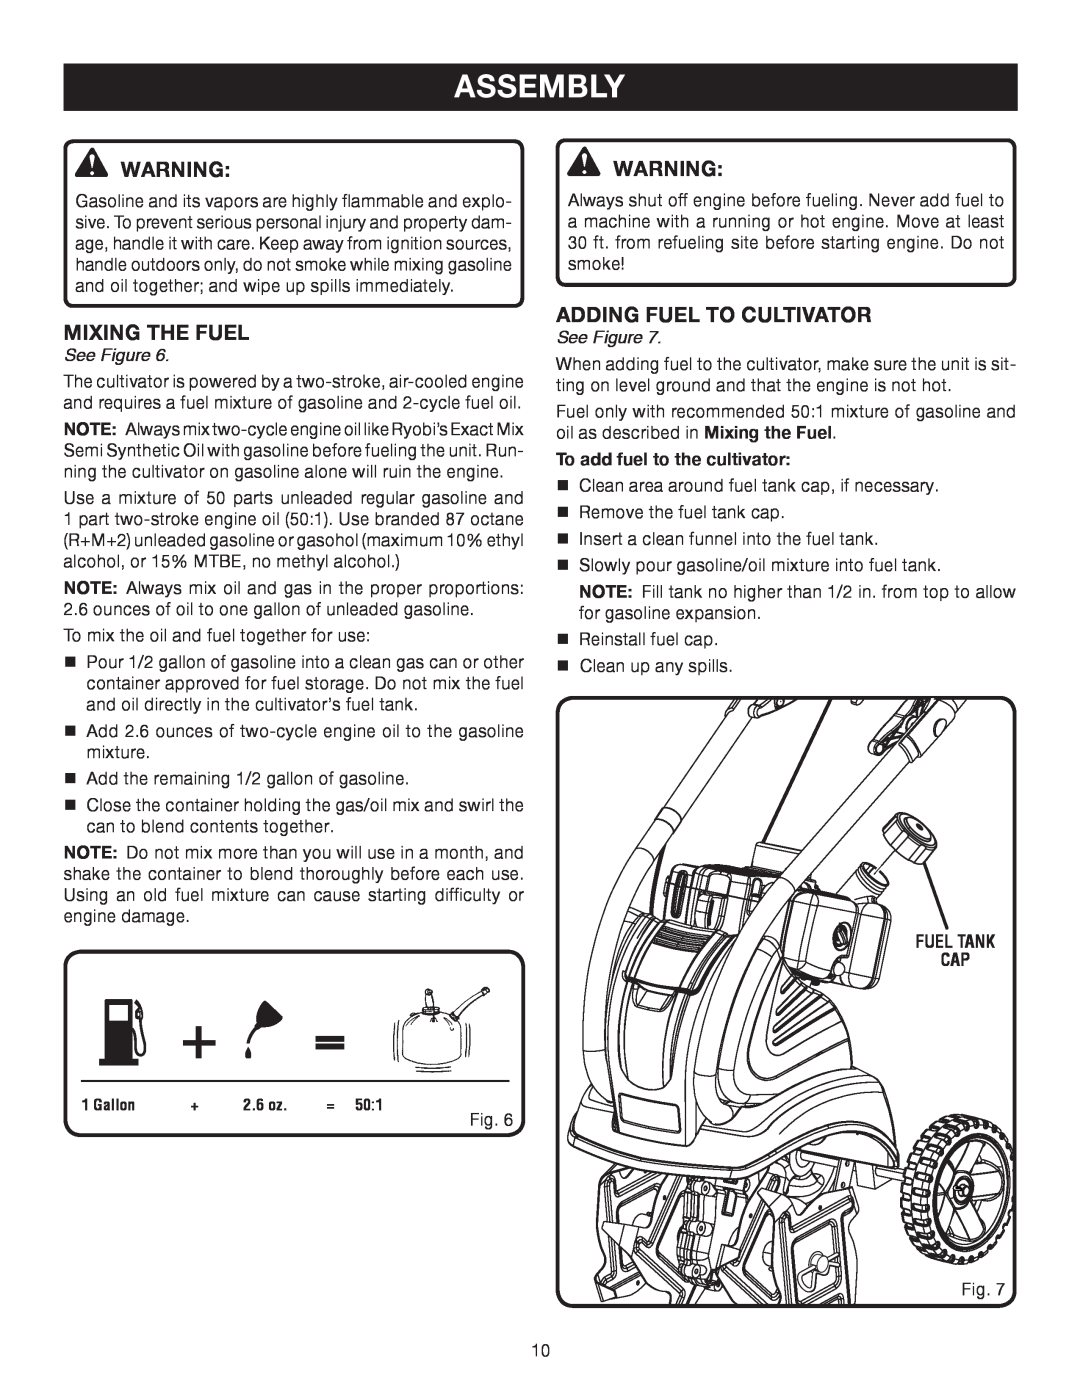 Ryobi RY60512 manual Mixing The Fuel, Adding Fuel To Cultivator, Assembly, See Figure, To add fuel to the cultivator 